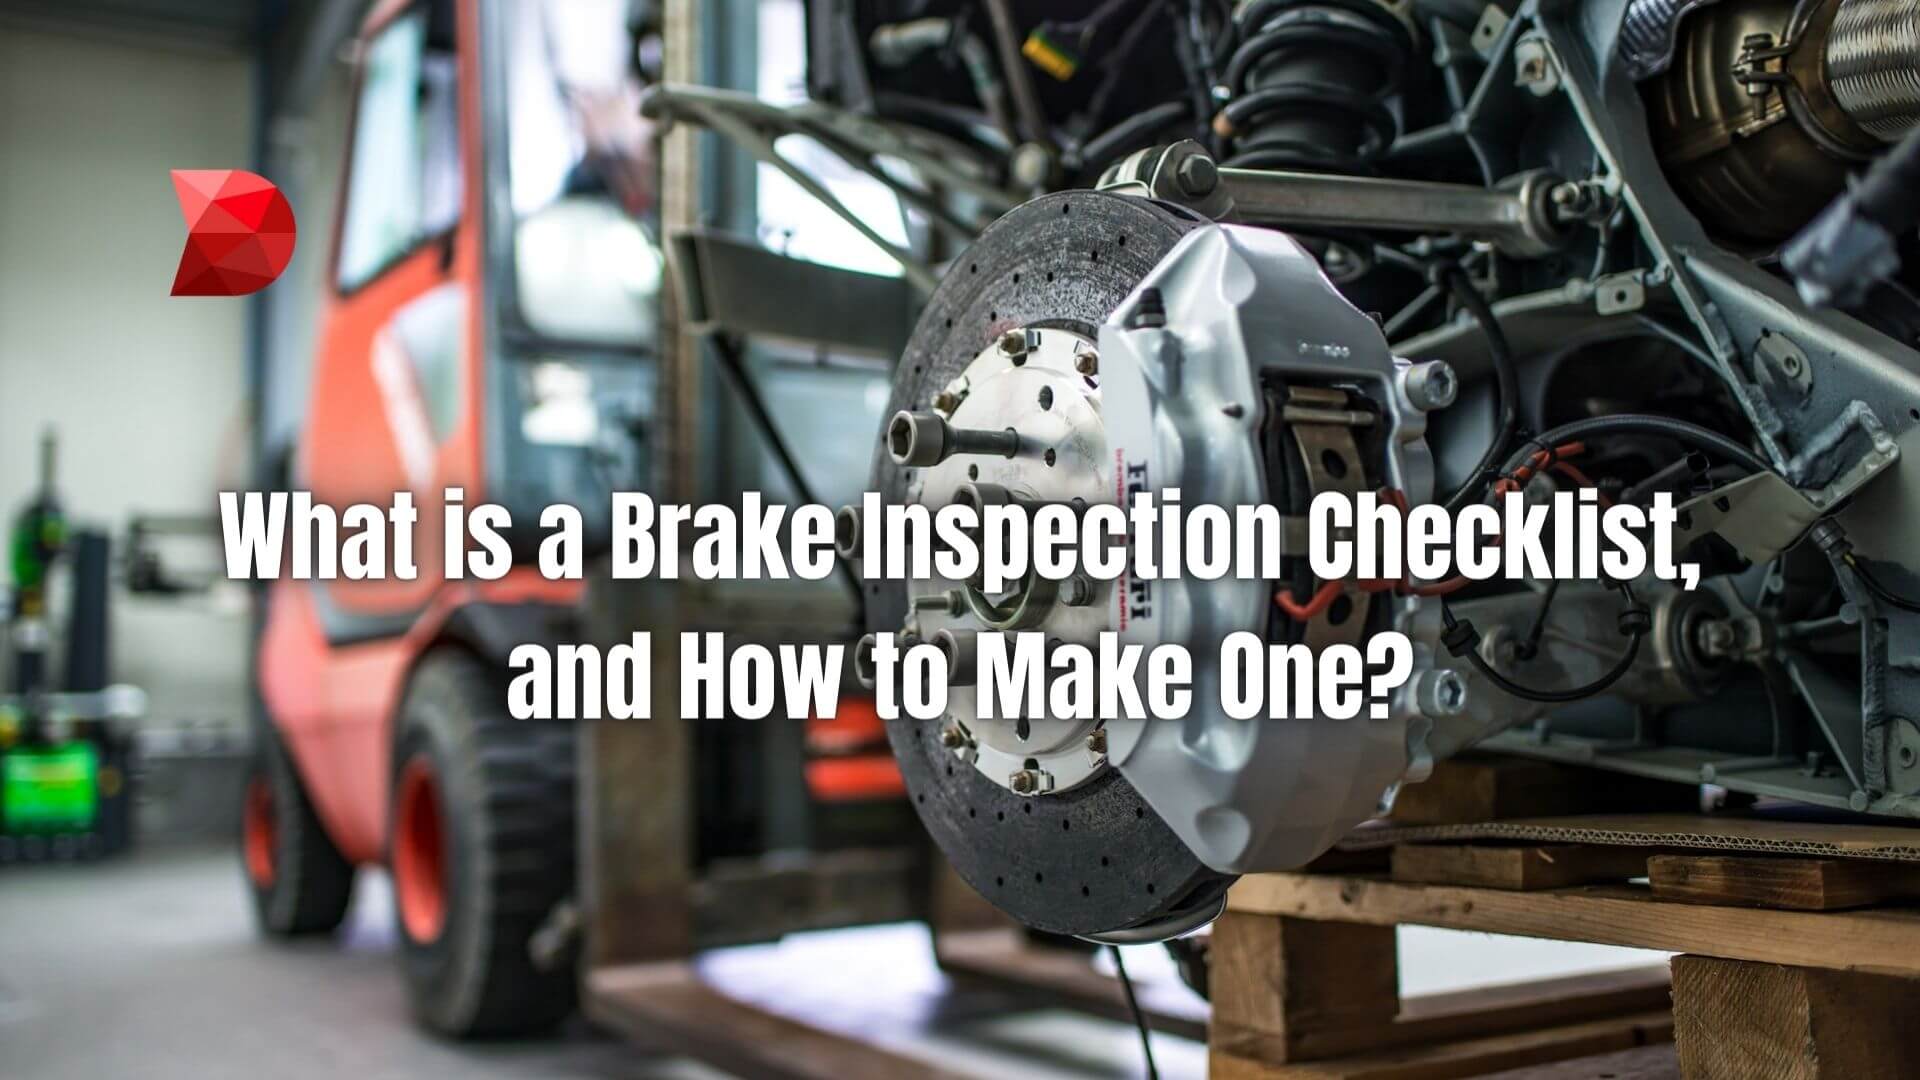 Brake inspection helps identify issues that affect the performance and safety of the brakes. Here's how to make a brake inspection checklist.